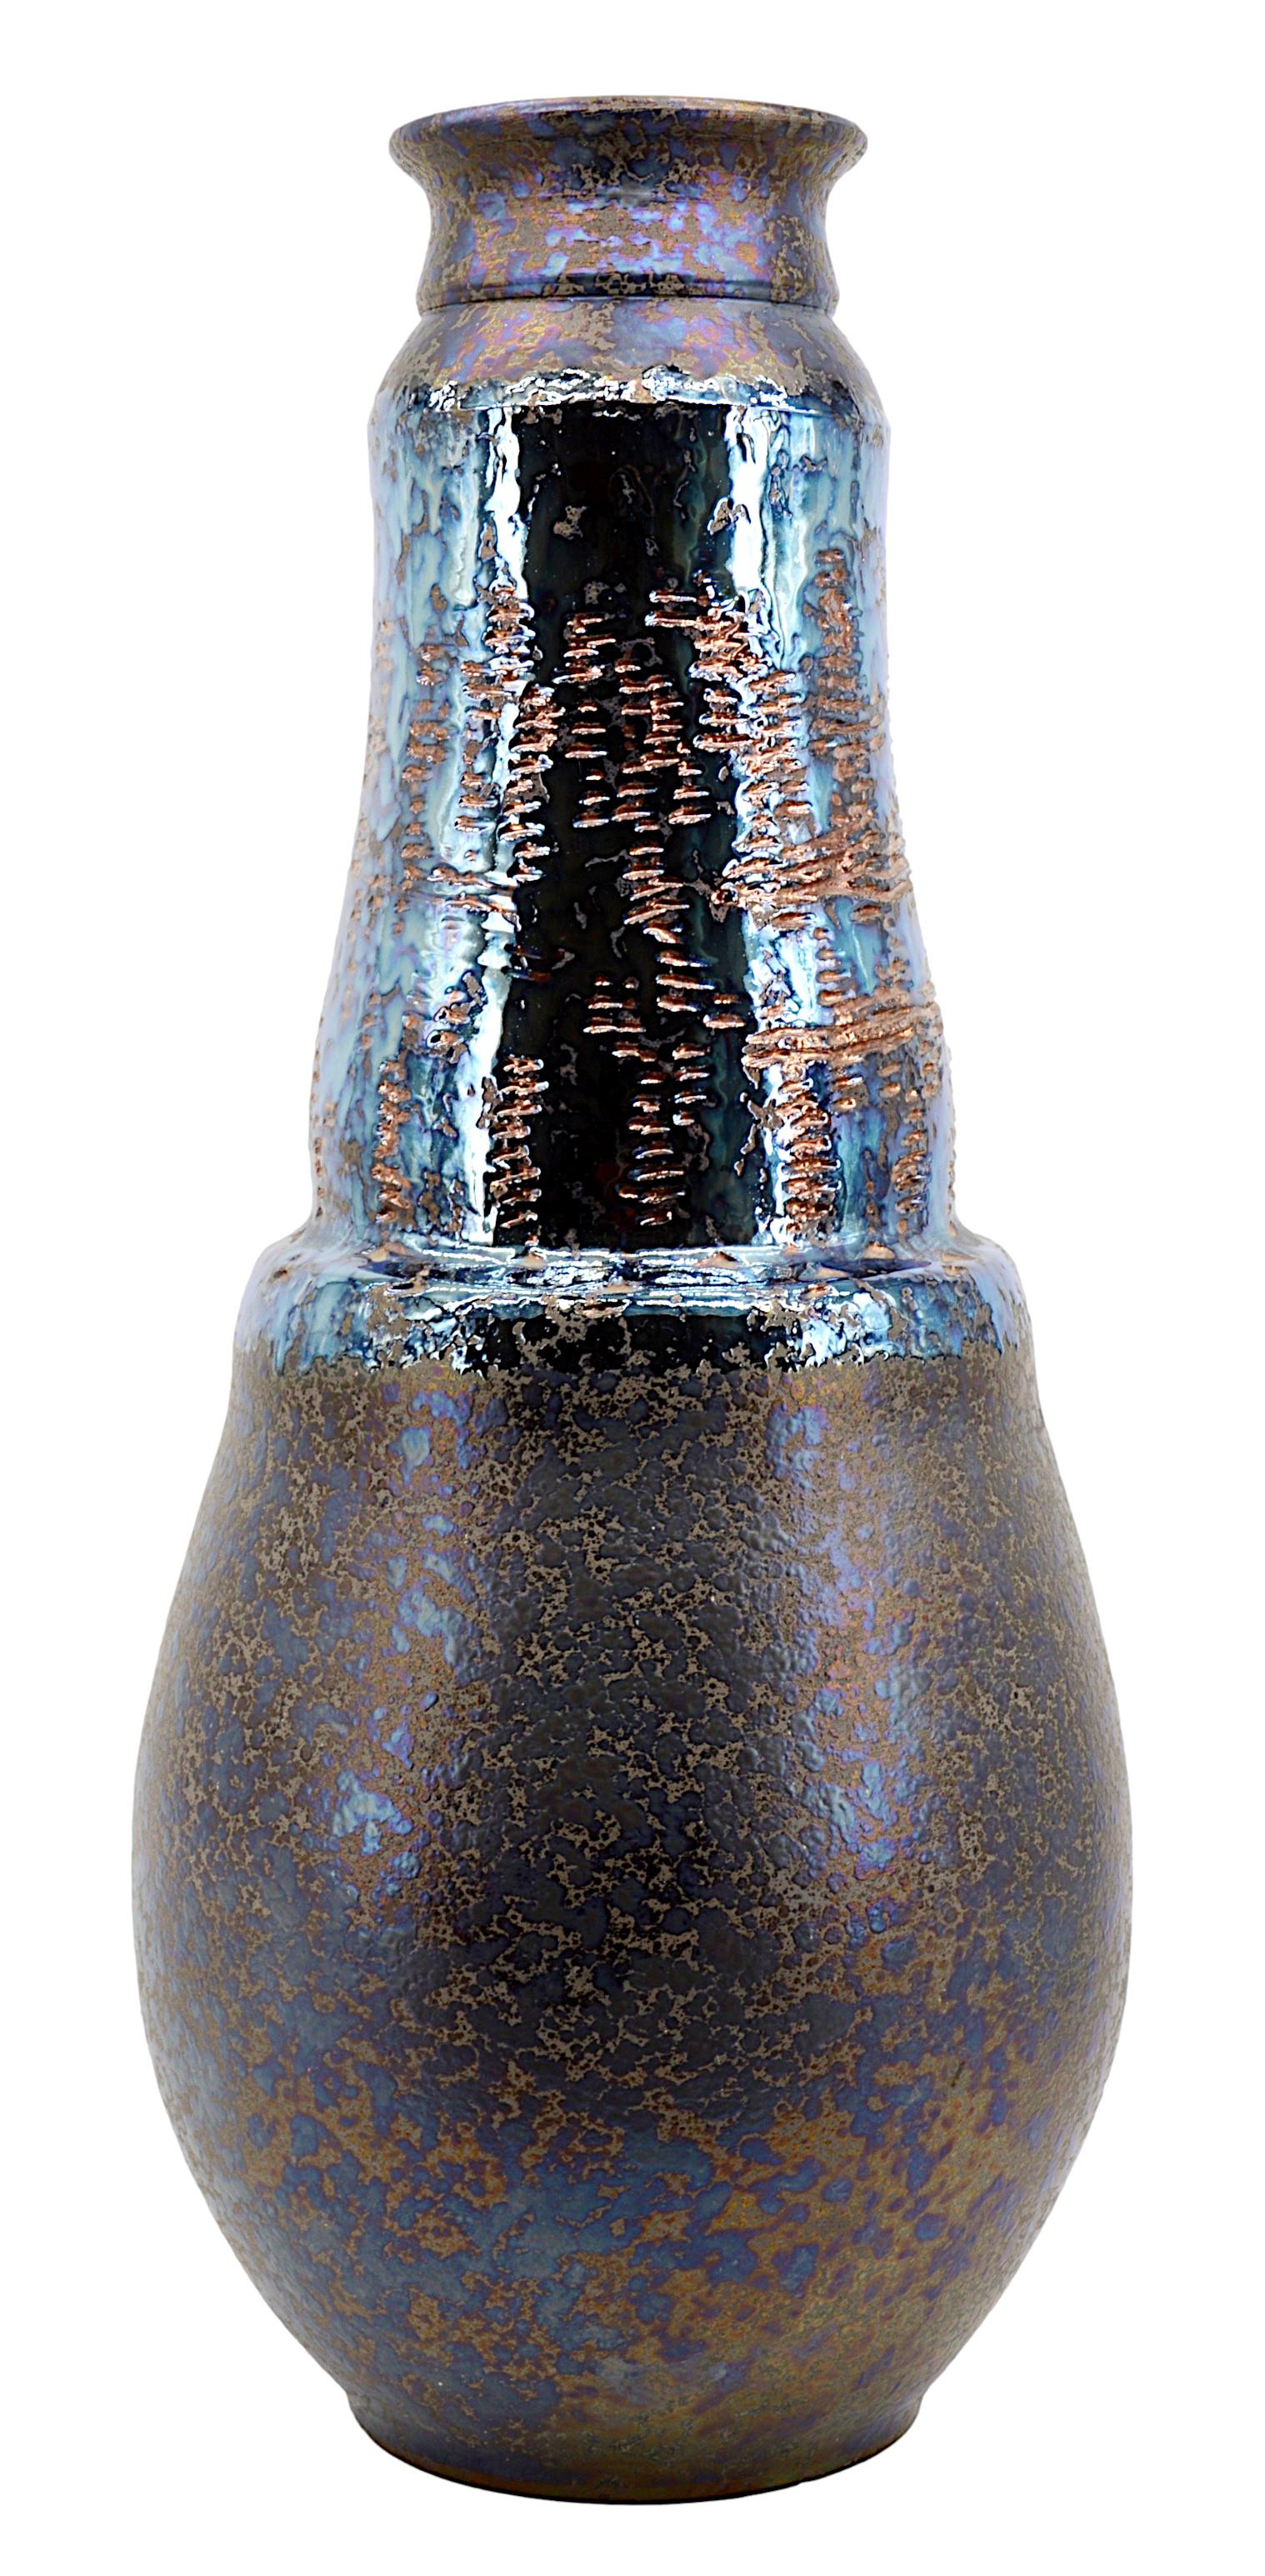 Huge Disco stoneware vase, 1980s. Huge baluster-shaped vase with speckled and shiny ribbed cover. In imitation of shiny faceted clothing from the disco period. Height : 68cm (26.8